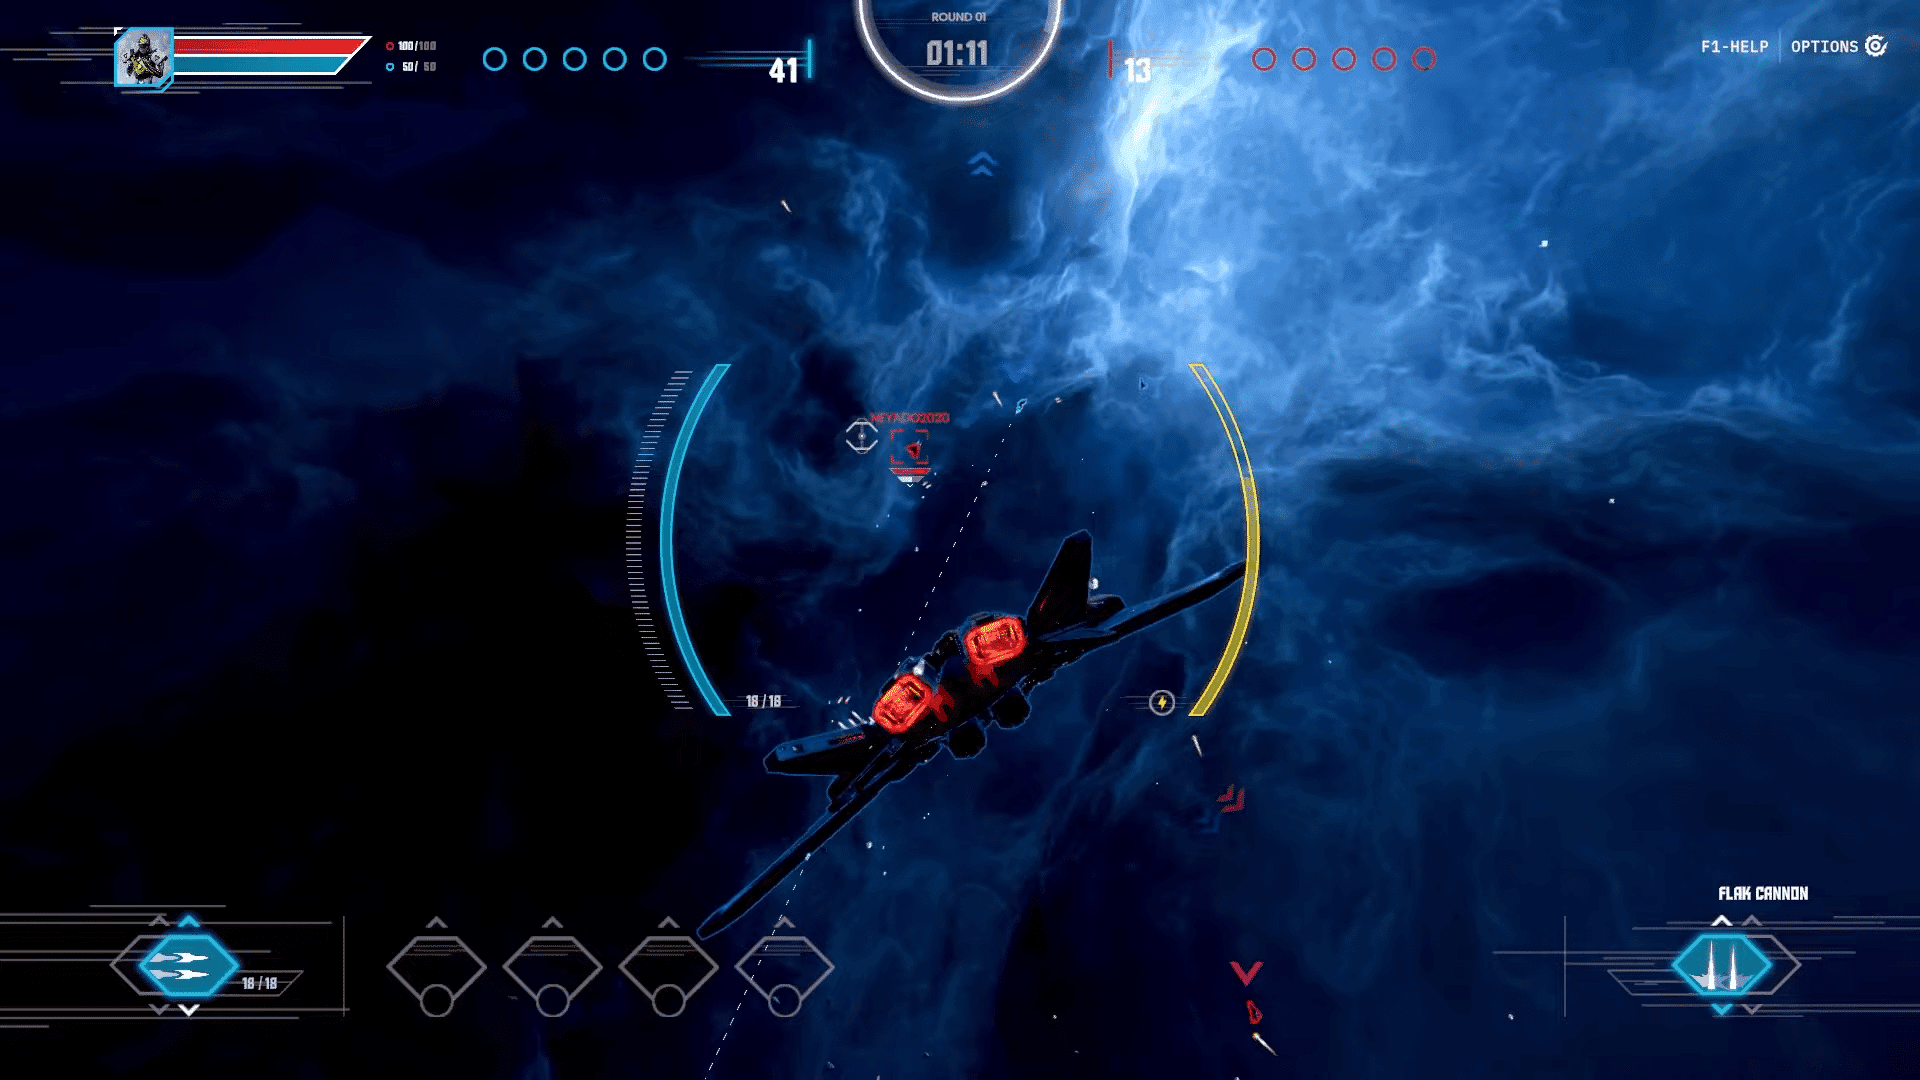 StarHeroes offers thrilling space combat in third-person perspective, allowing players to explore the universe, engage in multiplayer modes.